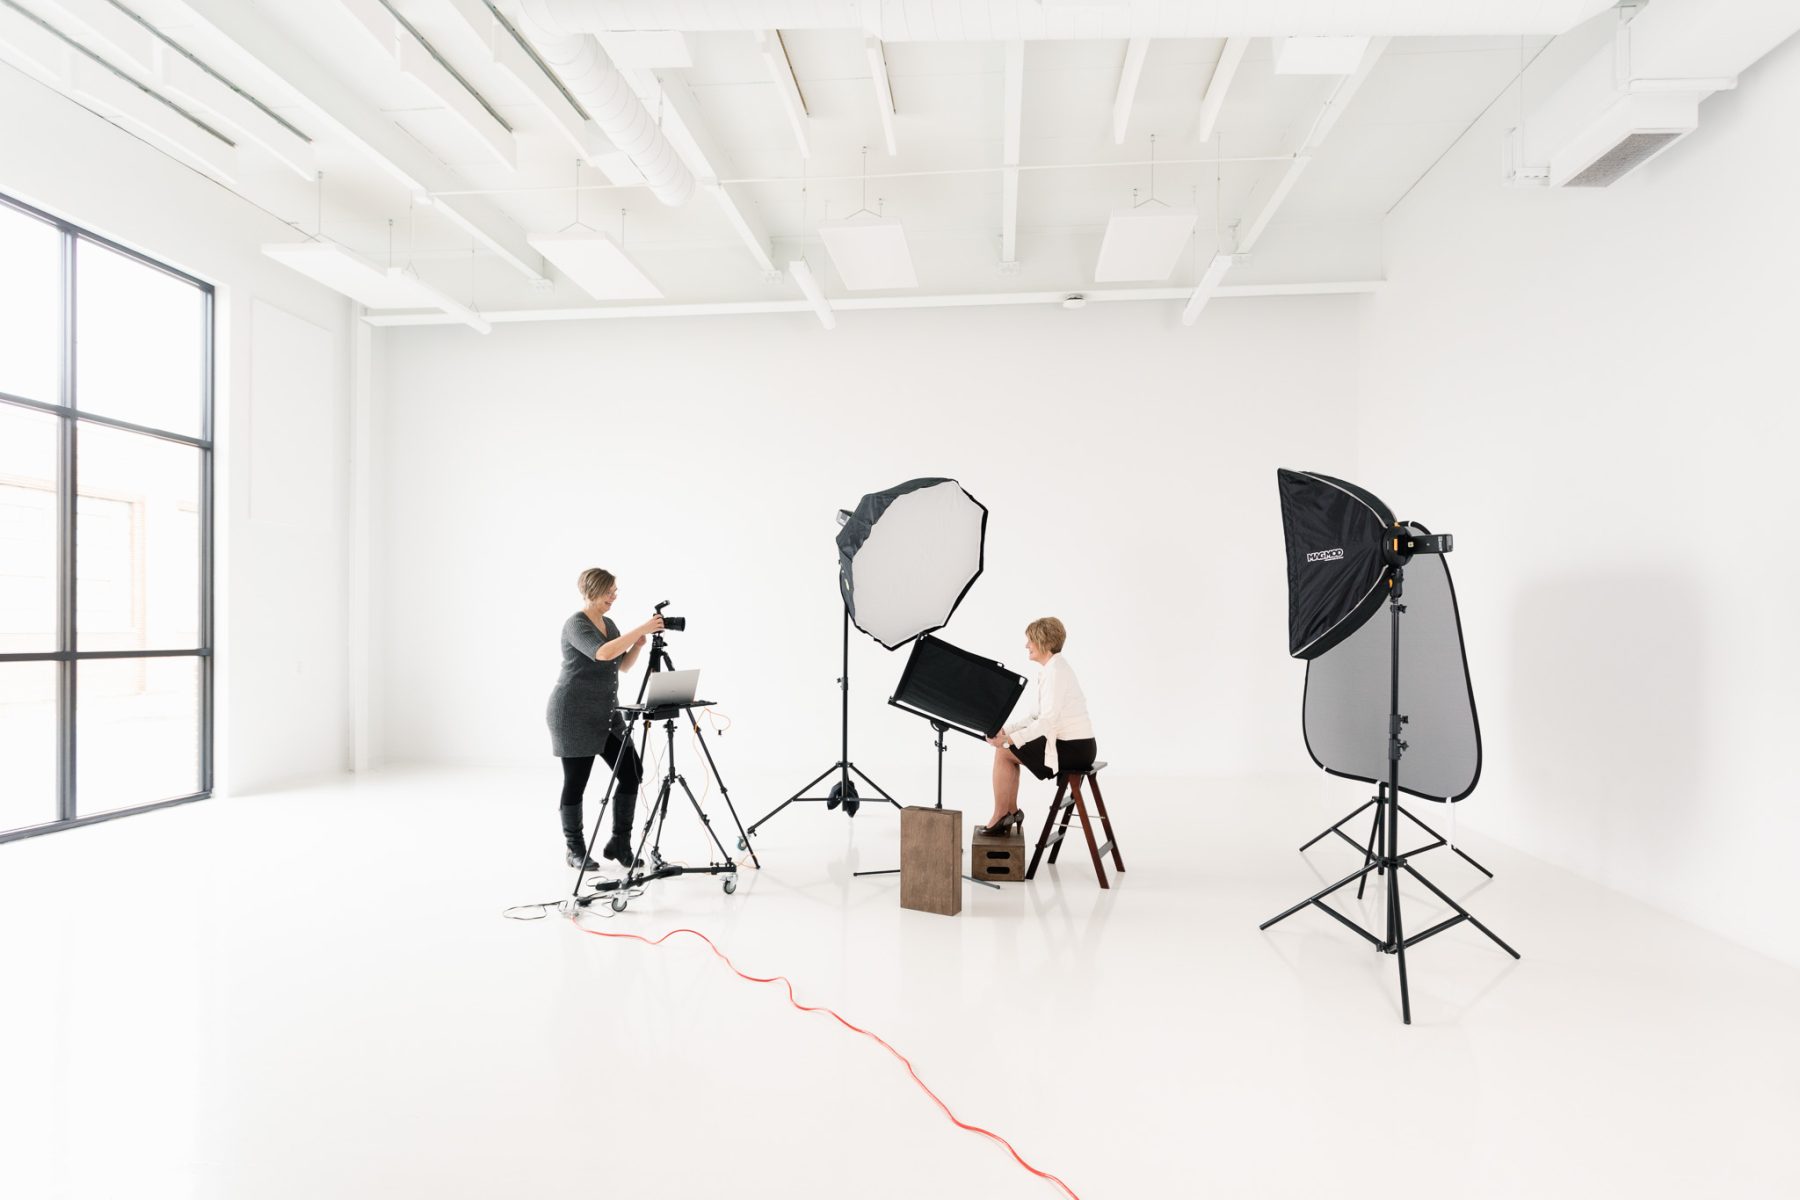 BTS headshot session at the all-white studio at SUPPLY